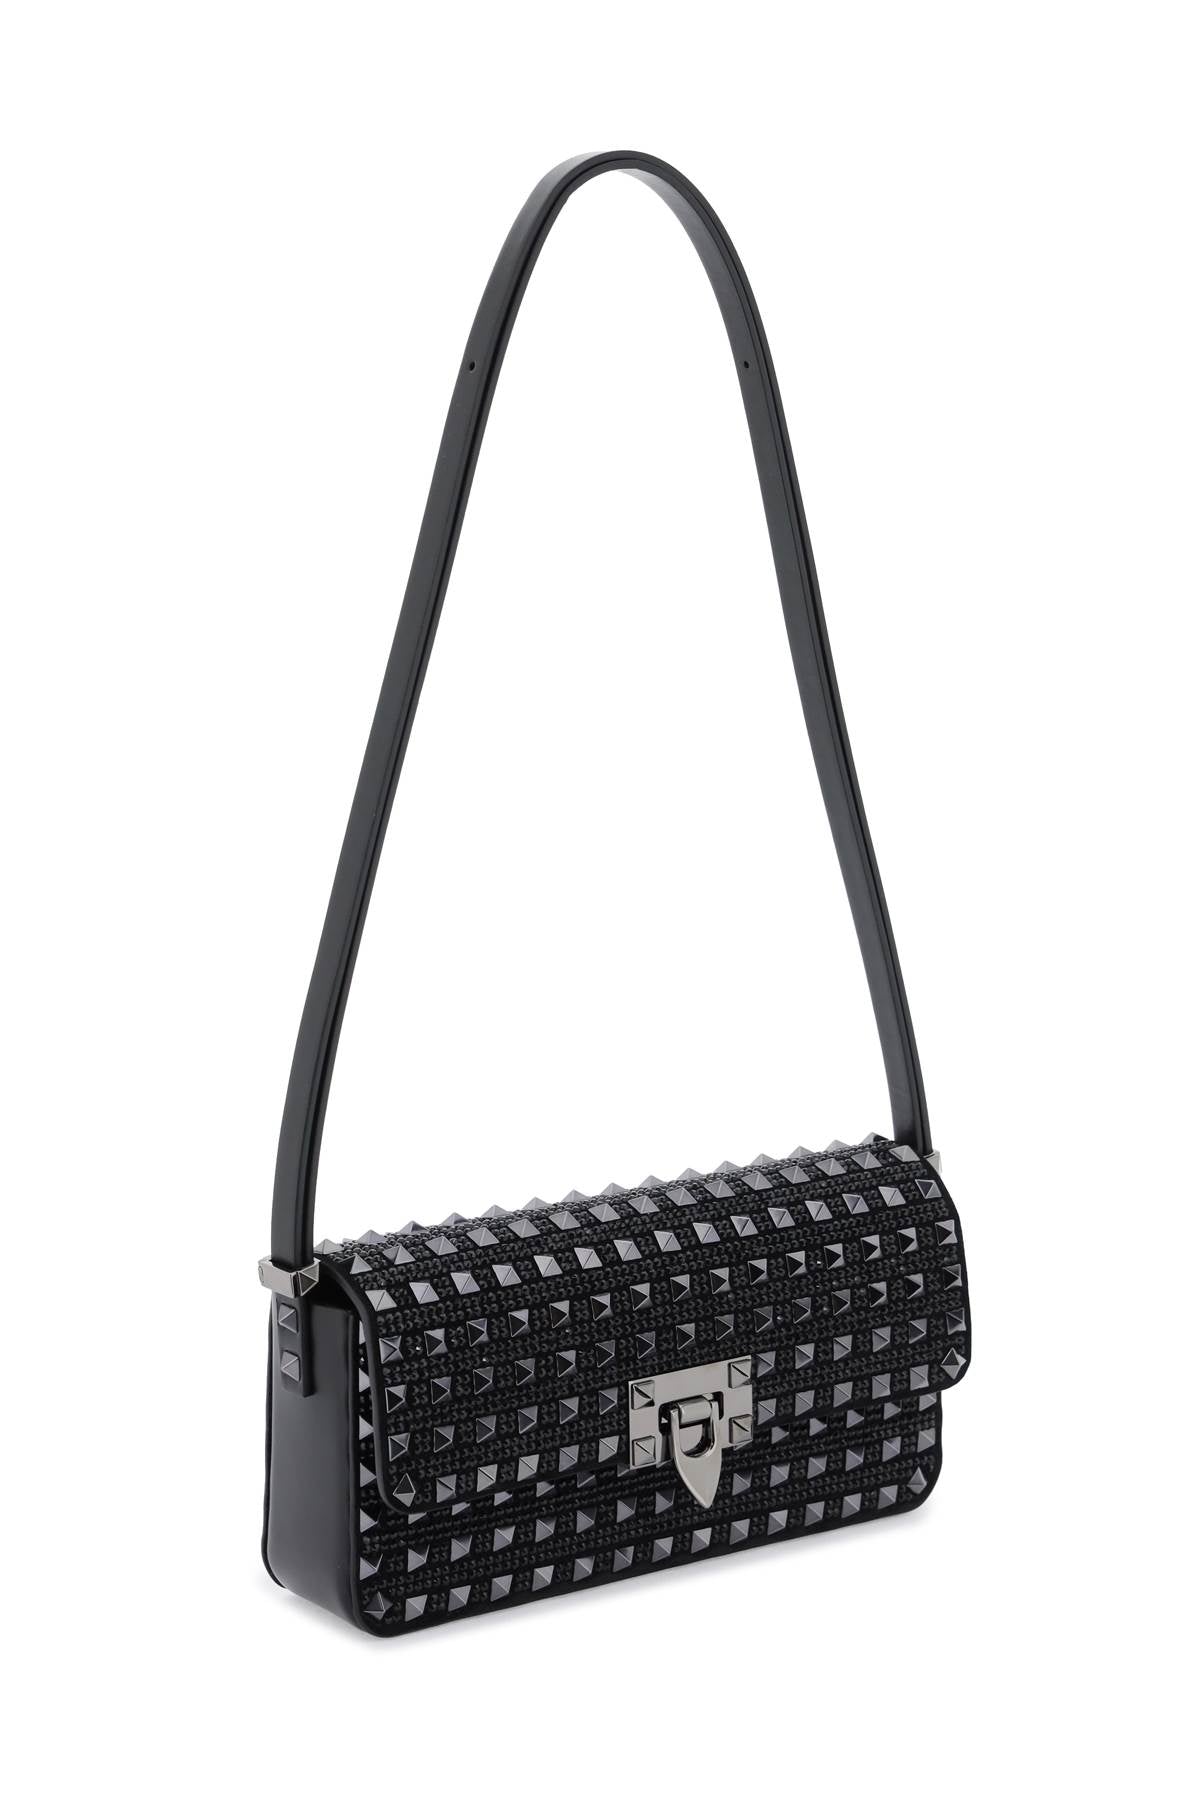 VALENTINO GARAVANI Studded and Embroidered Leather Shoulder Bag for Women - FW23 Collection